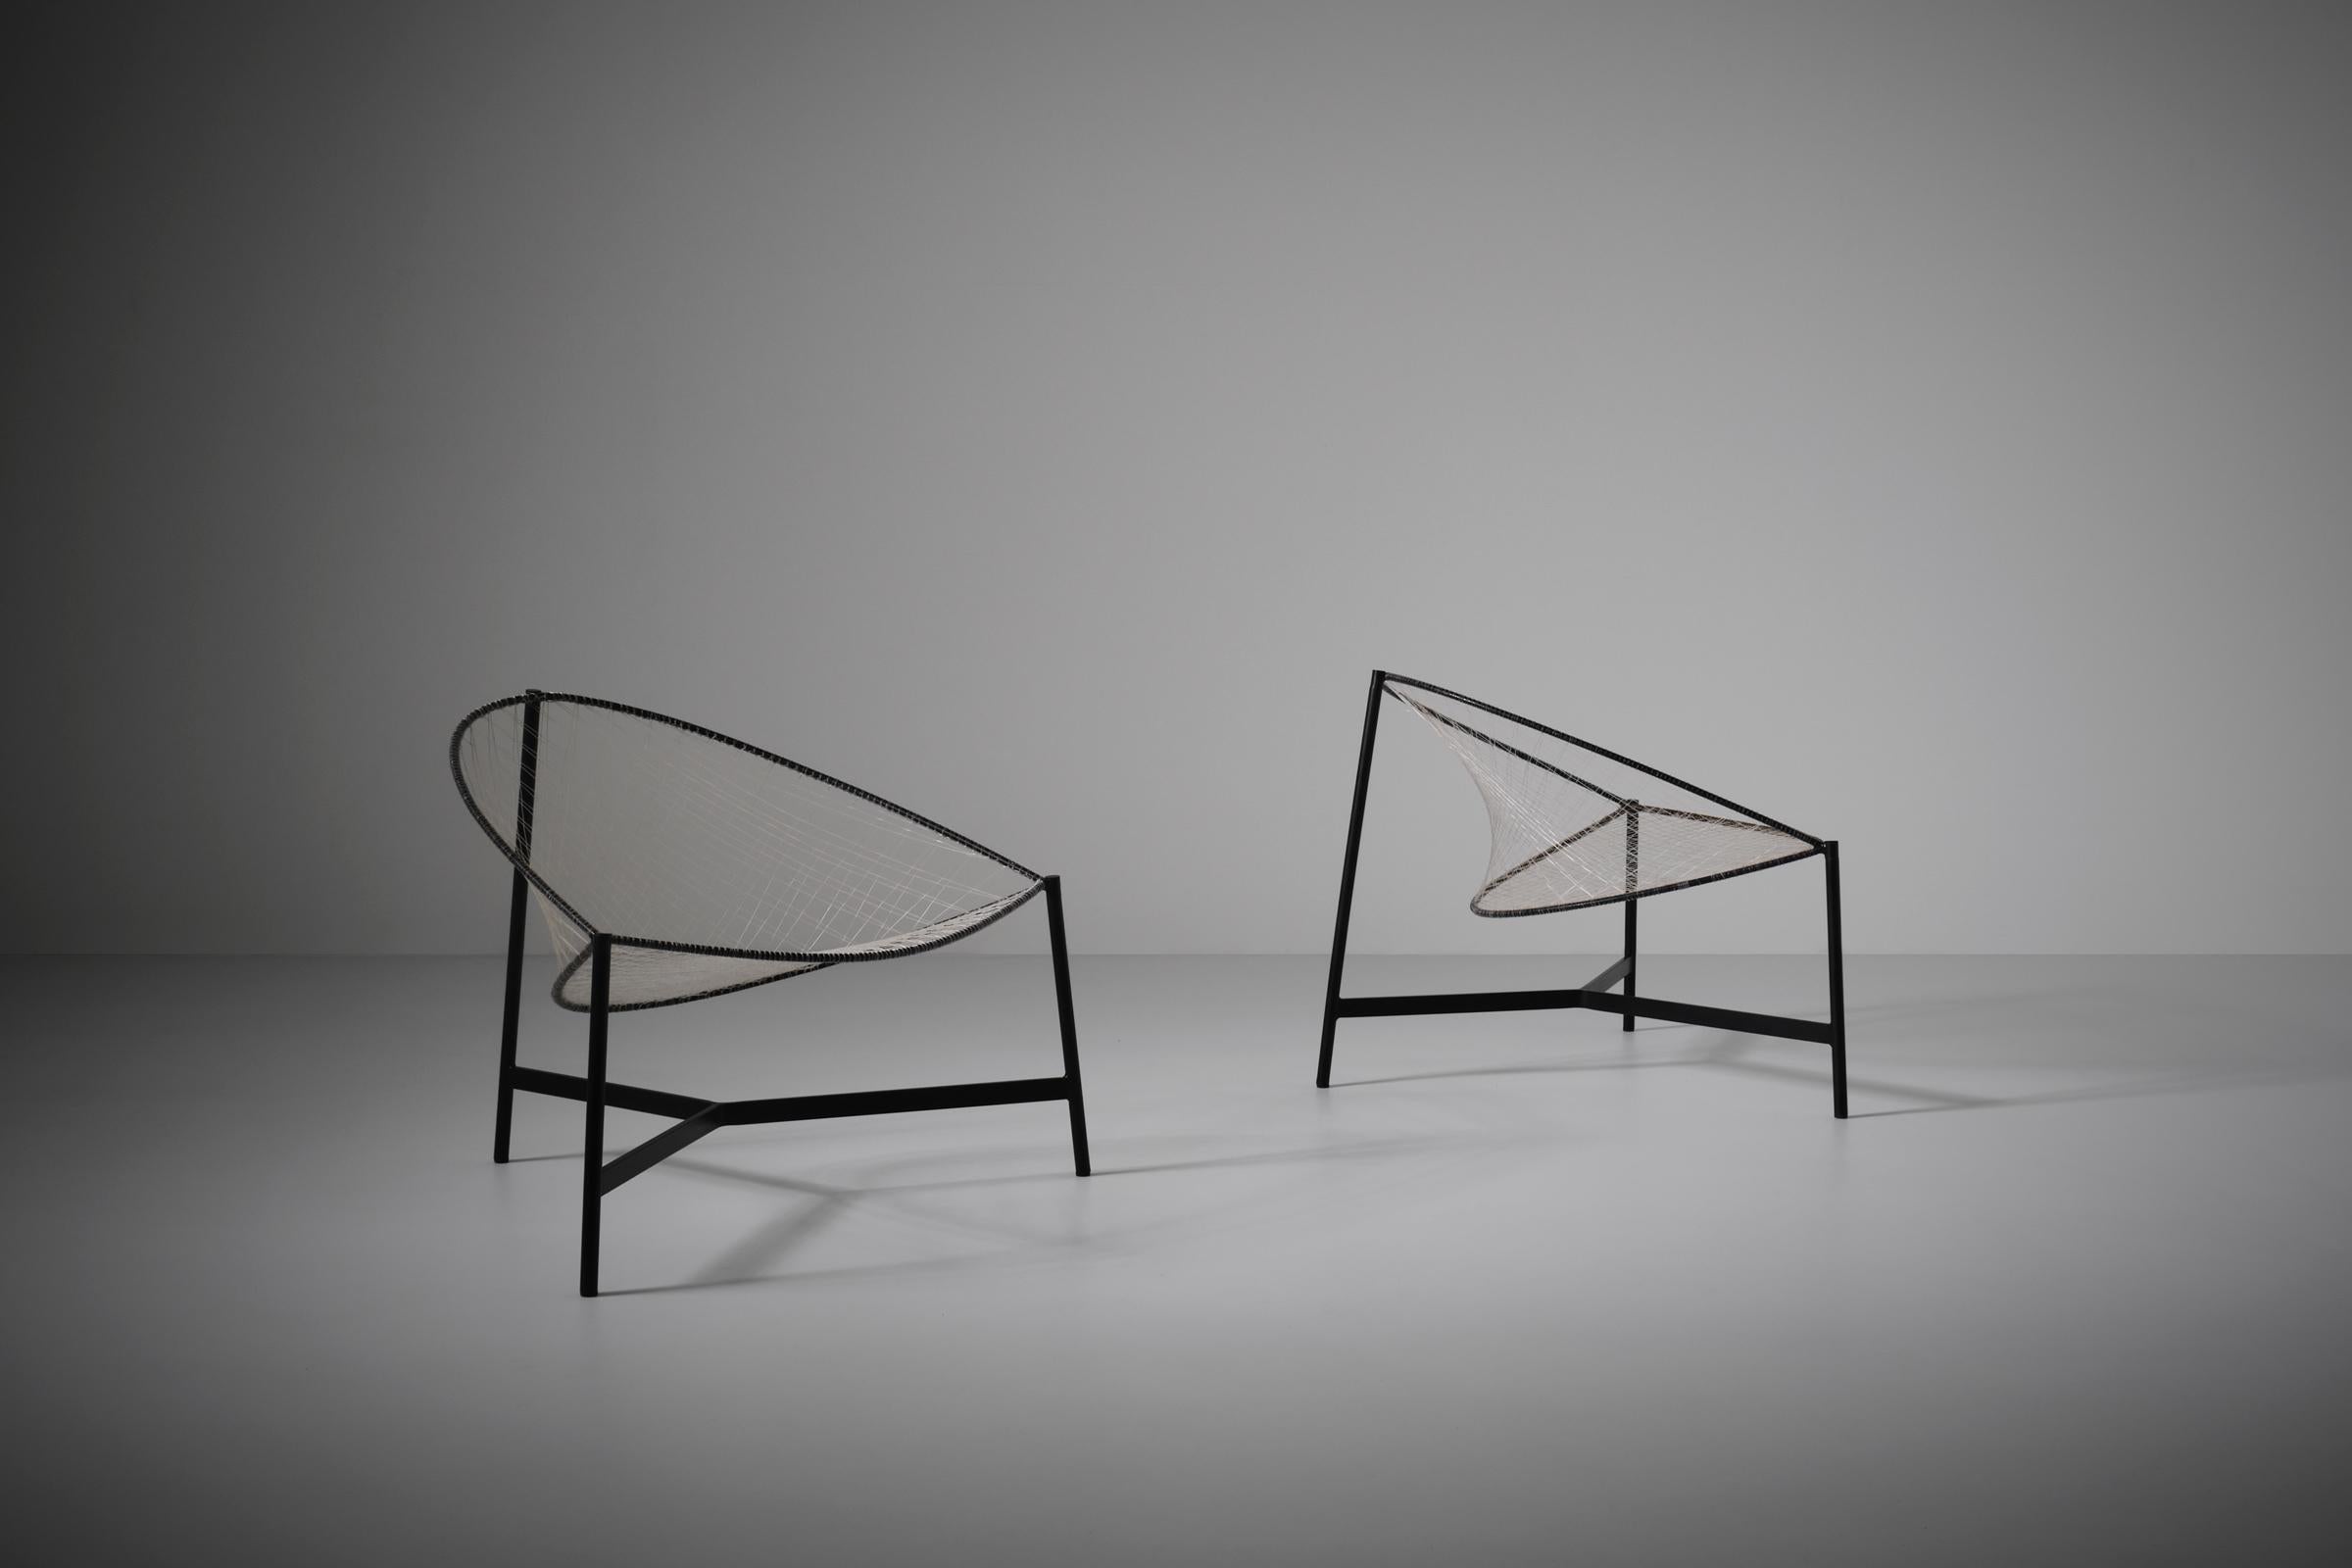 Rare pair of 'Cesto' chairs by Luciano Grassi, Sergio Conti and Marisa Forlani by Emilio Paoli, Italy circa. 1959. The chairs are from the 'Monofilo' series. The design is the result of experimenting with new materials and the simplification and